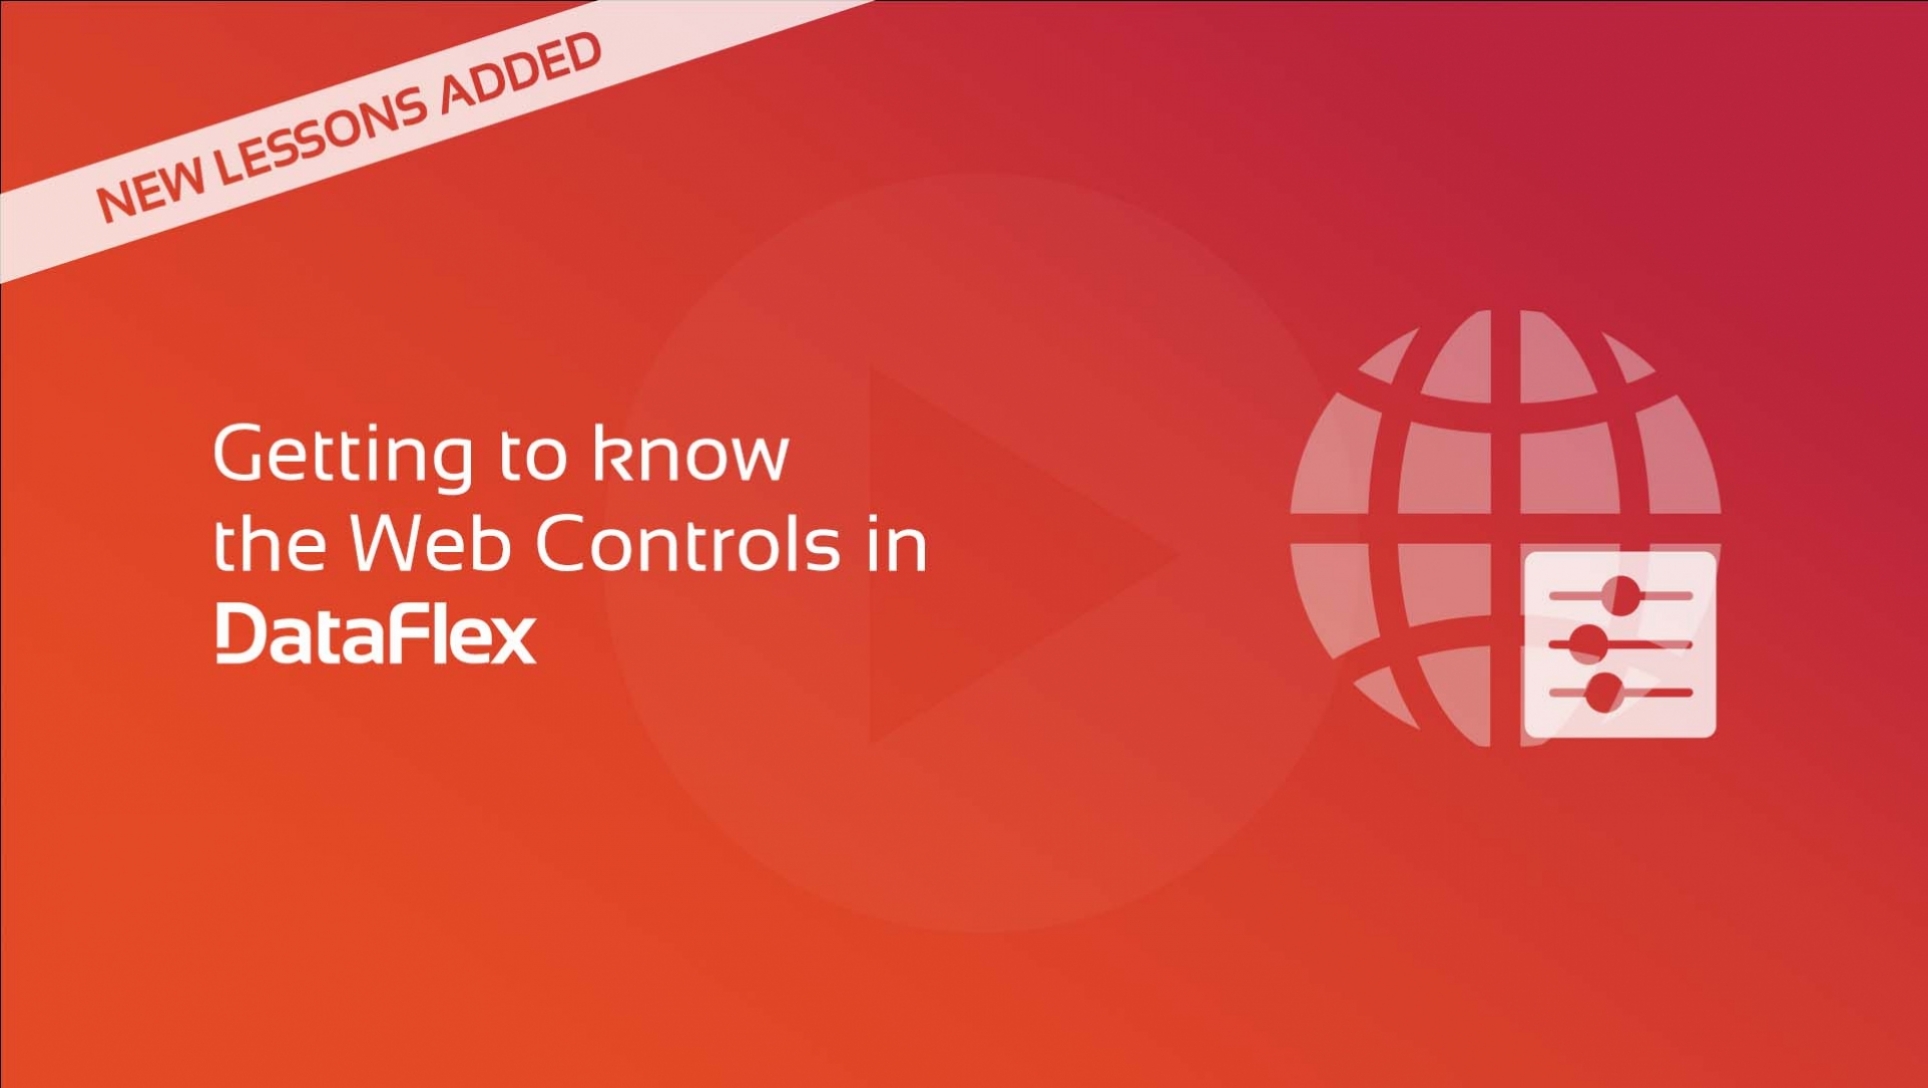 Check out the latest additions to the Getting to know the Web Controls Course! 